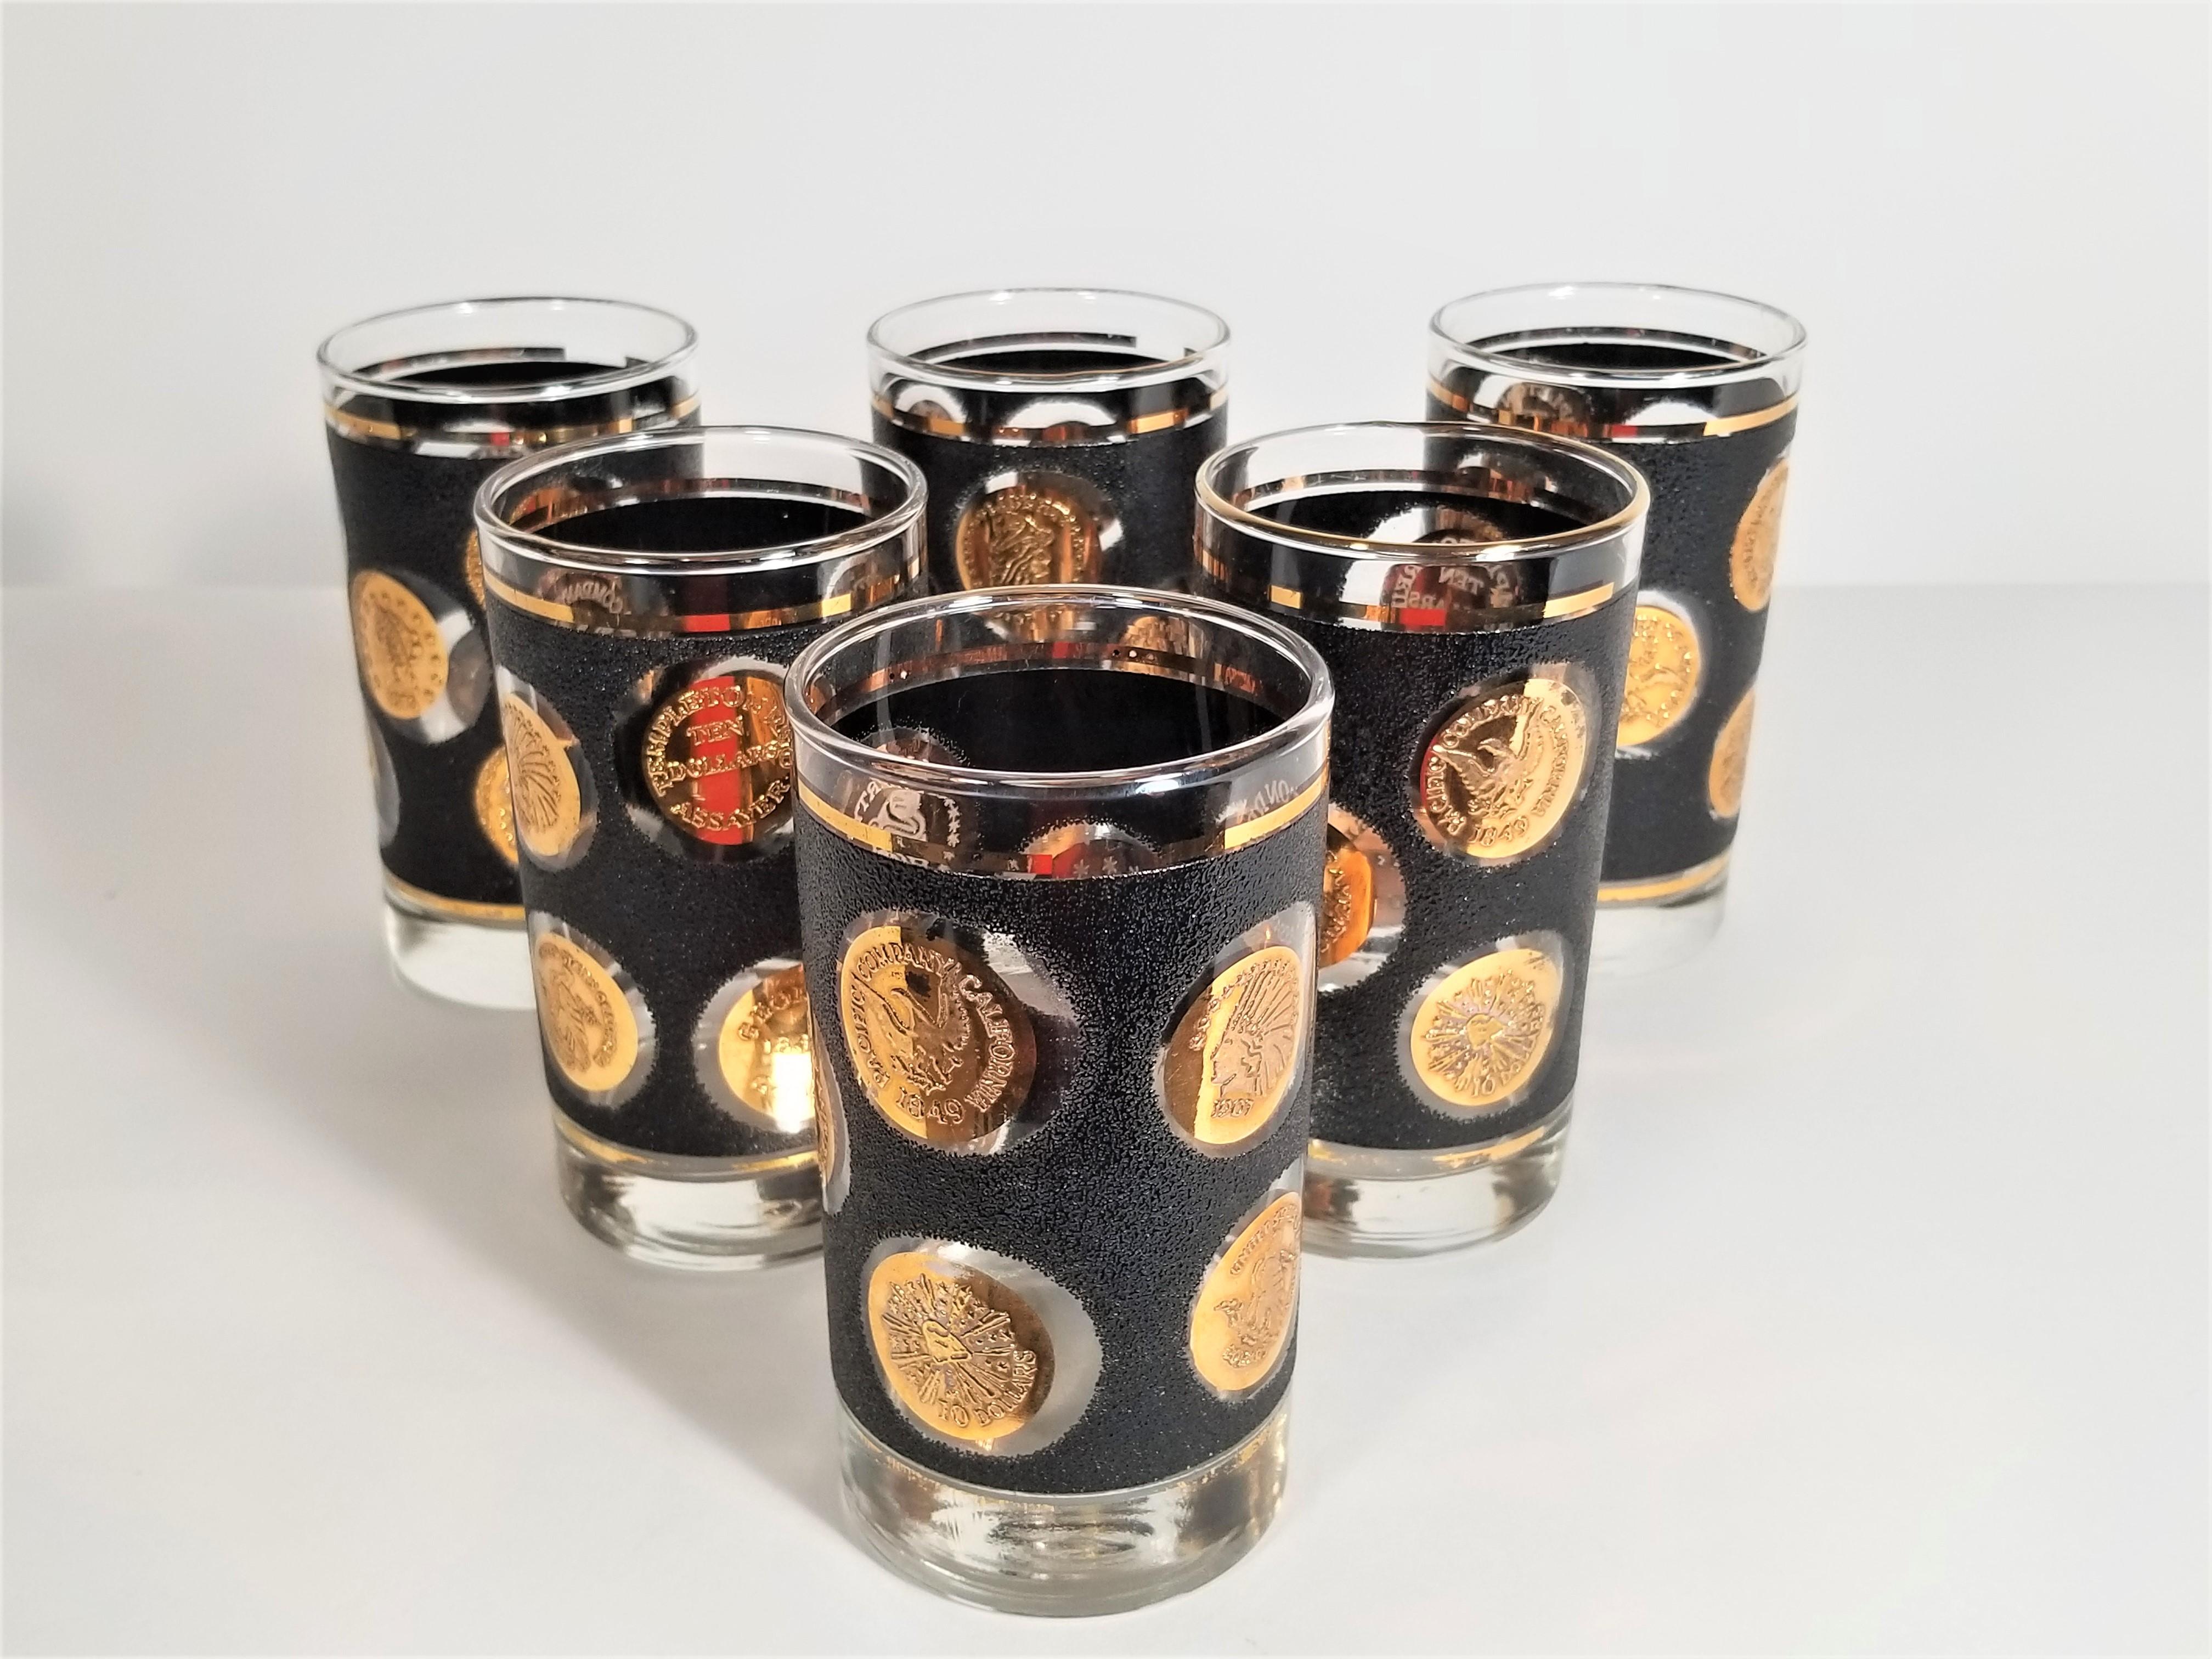 6 1960s midcentury black and gold glasses by Libbey. We also have the tumbler / rocks size listed for sale.